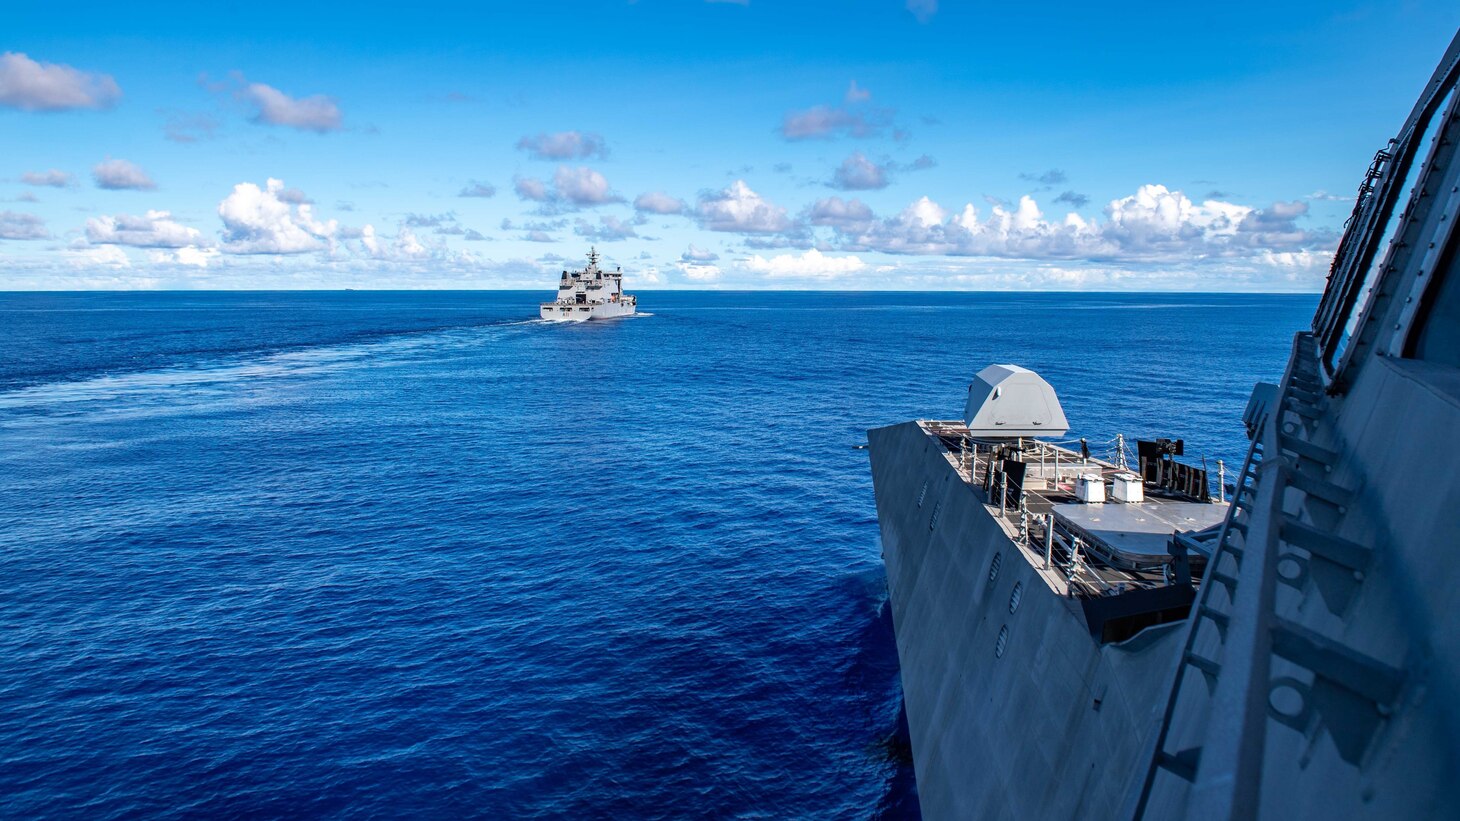 The Independence-variant littoral combat ship USS Charleston (LCS 18), right, sails alongside the Royal New Zealand Navy auxiliary ship HMNZS Aotearoa (A11), prior to a replenishment-at-sea.